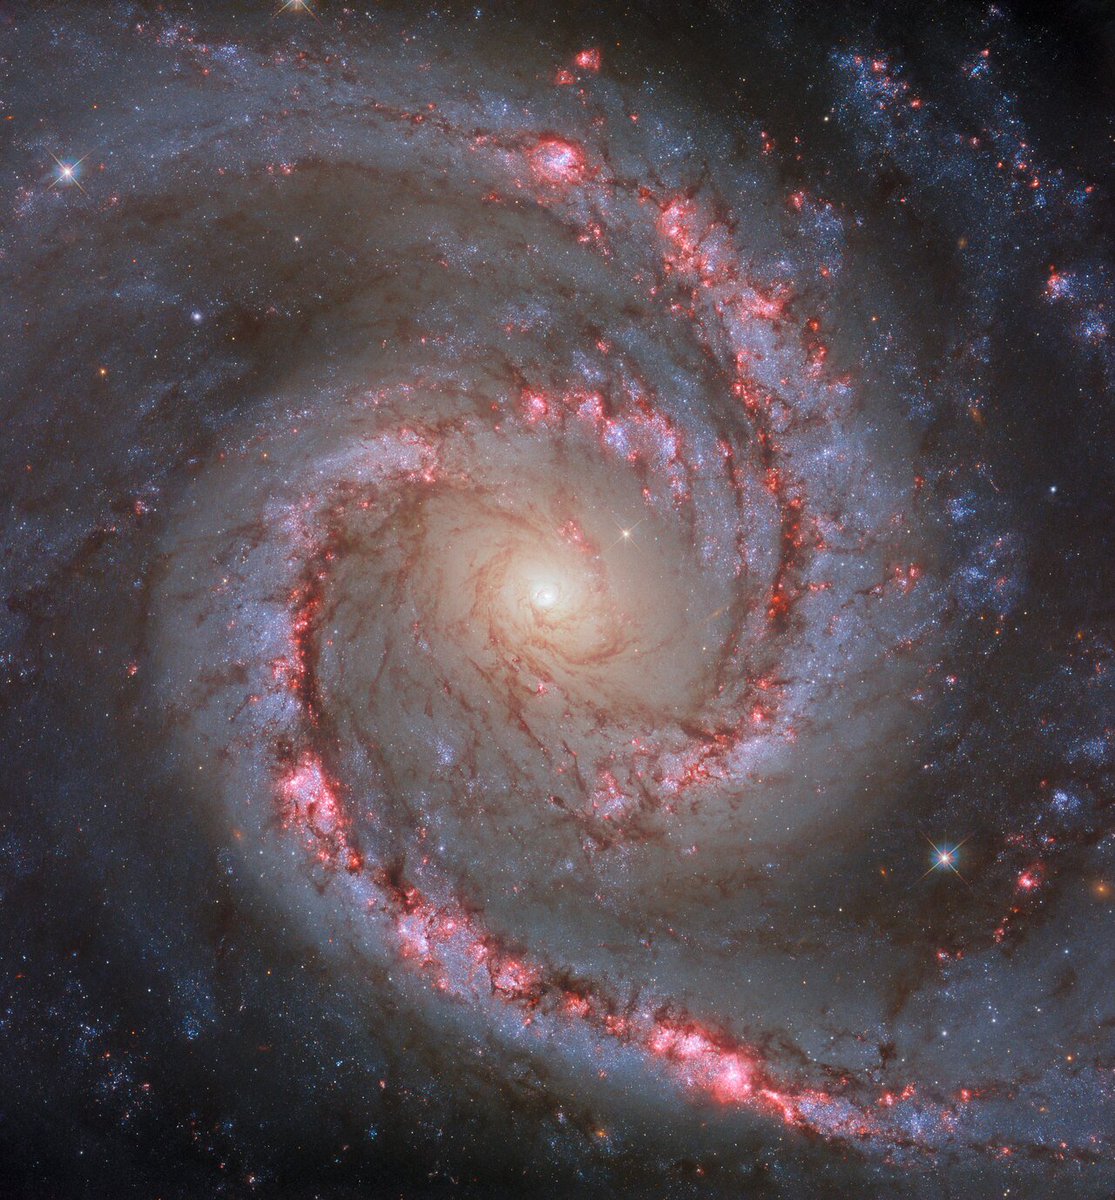 Gorgeous: The spiral galaxy NGC 1566, known as the ‘Spanish Dancer Galaxy' It is part of the Dorado galaxy group and is located about 60 million light-years away in the constellation Dorado. (Credit: ESA/Hubble & NASA, D. Calzetti and the LEGUS team, R. Chandar)